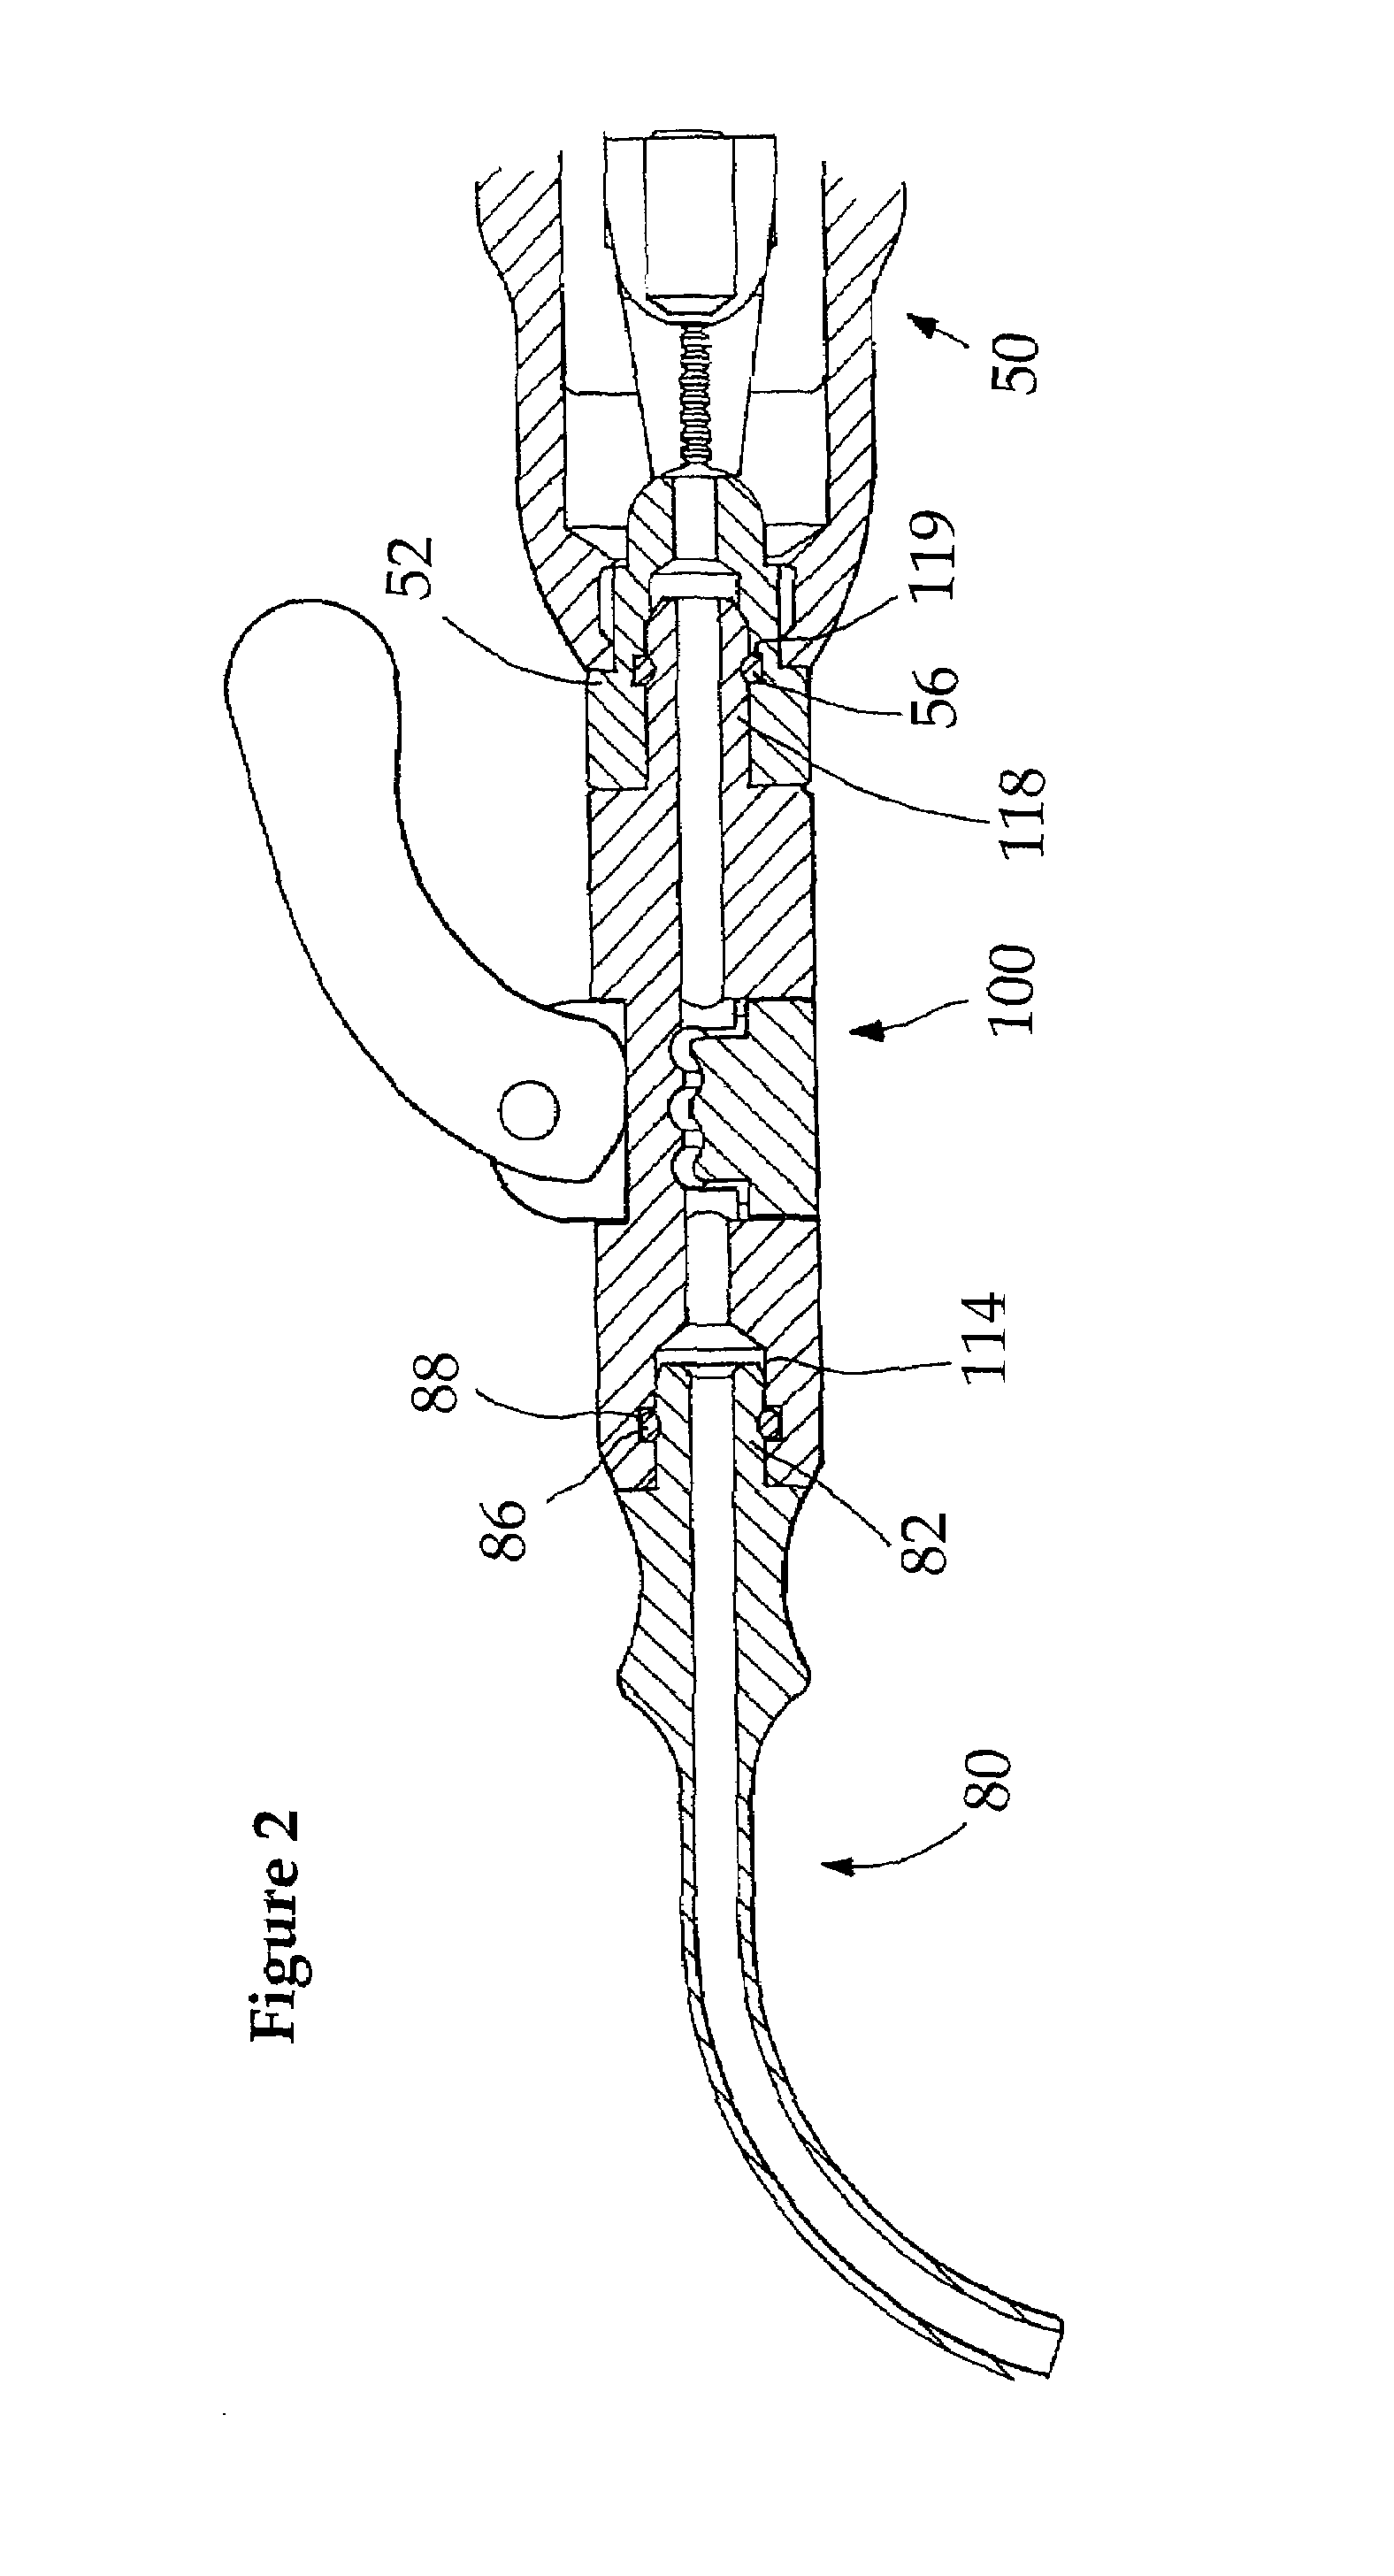 Method and apparatus for clamping surgical wires or cables